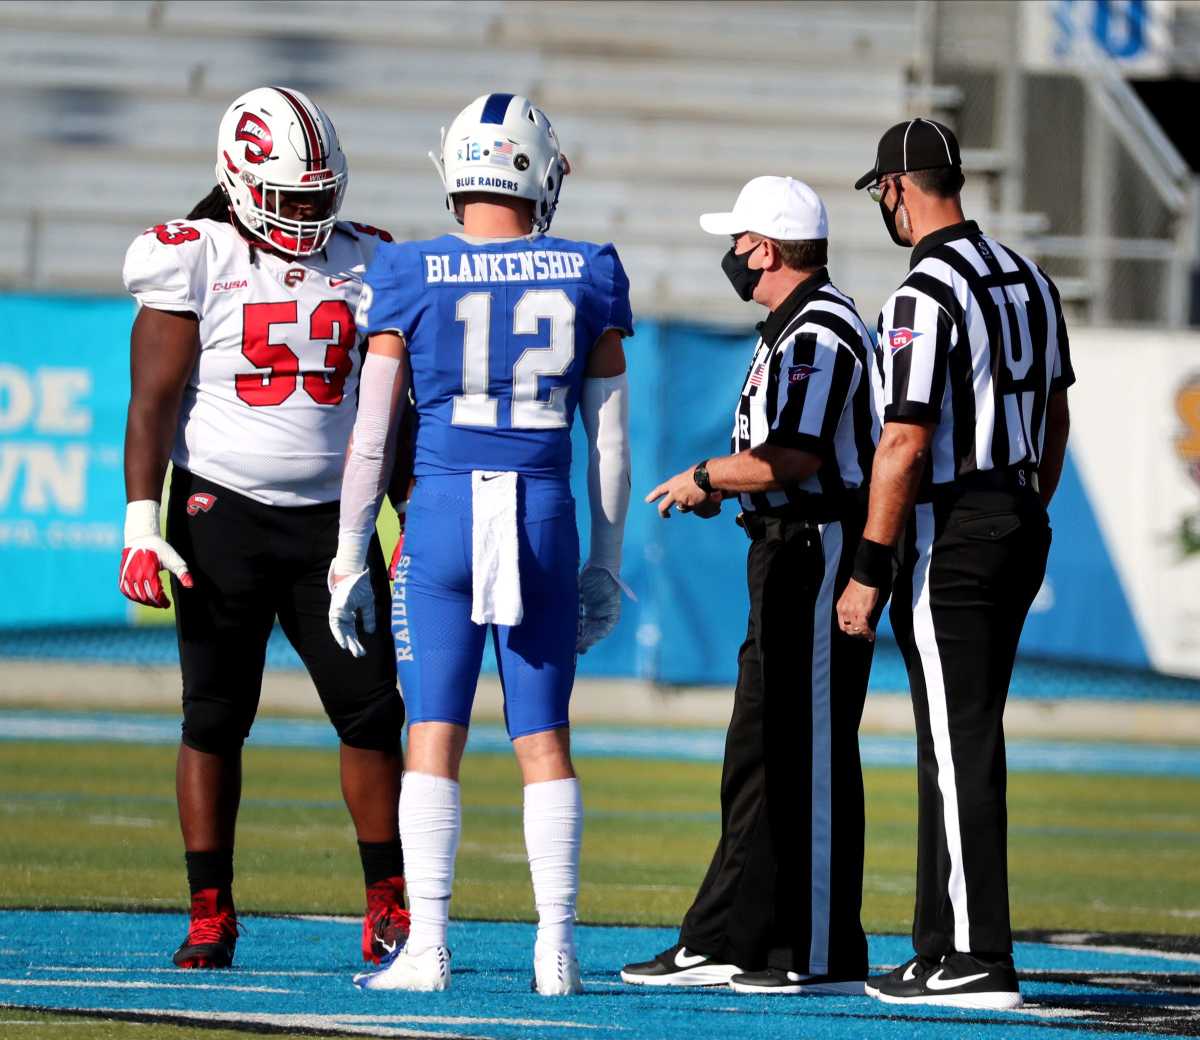 Nfl Draft Profile Reed Blankenship Safety Middle Tennessee Blue Raiders Visit Nfl Draft On 